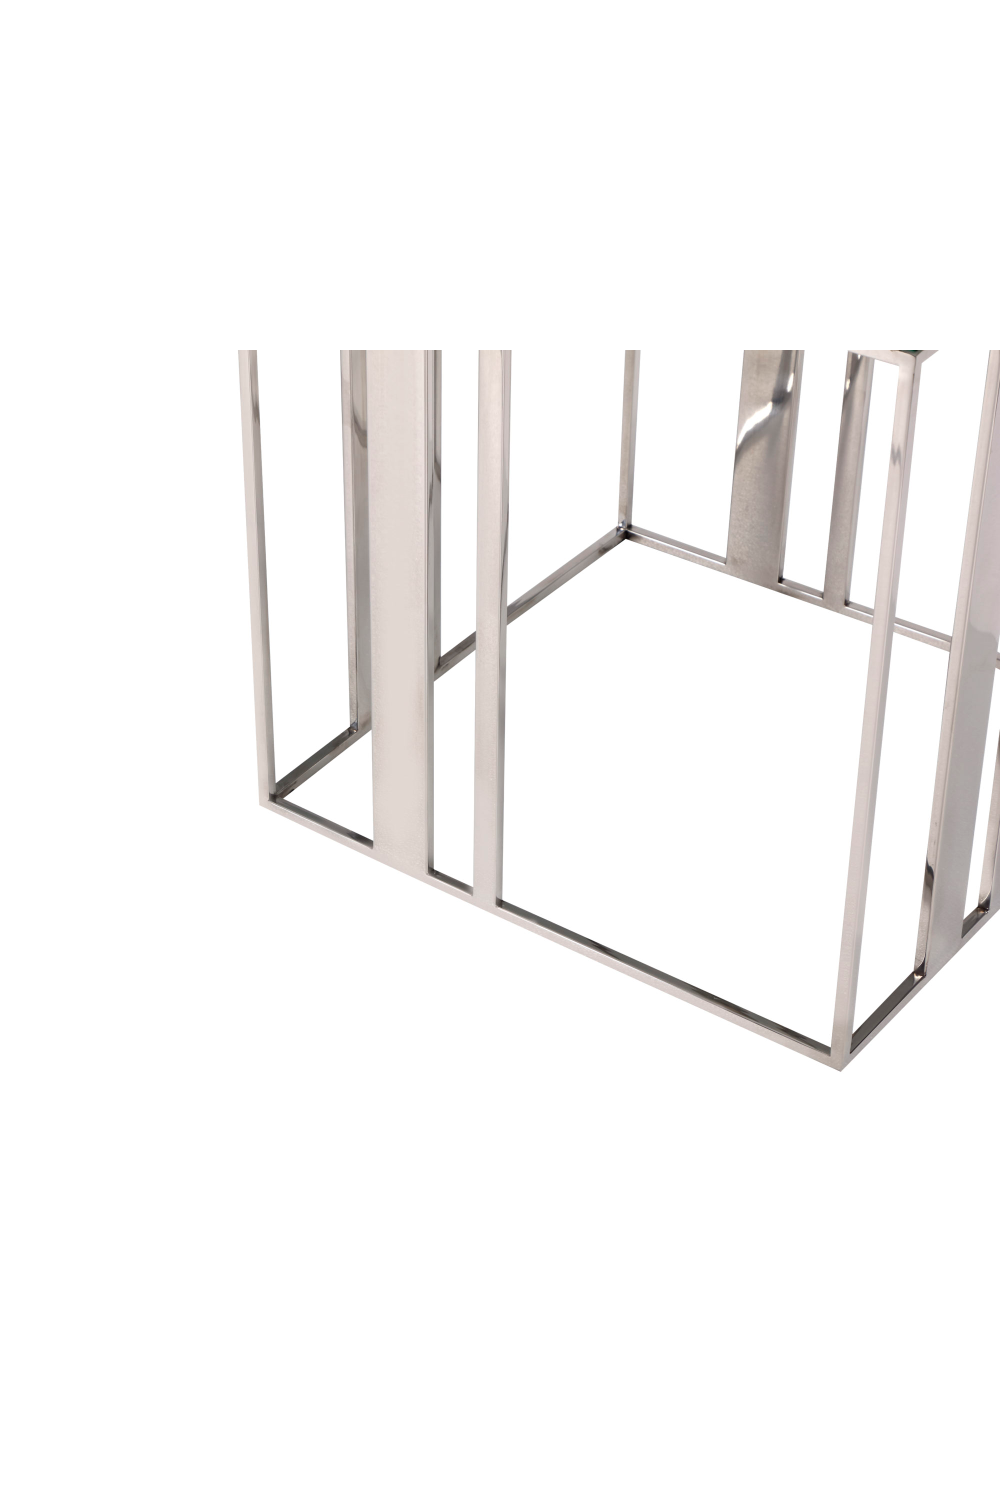 Silver Square Side Table | Liang & Eimil Lafayette | OROA